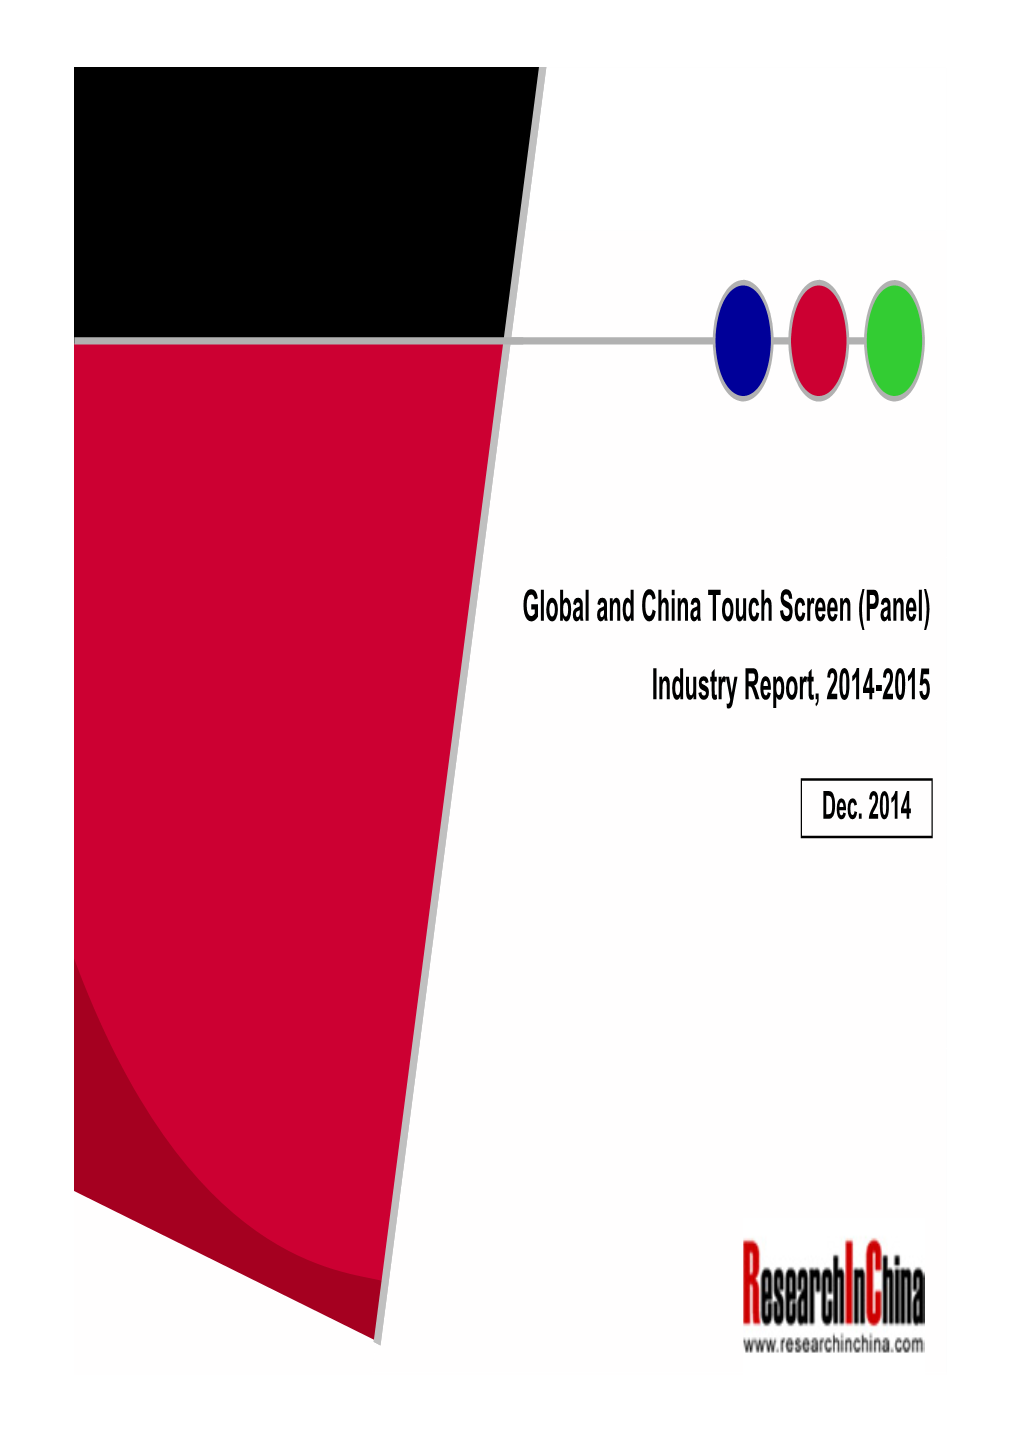 Global and China Touch Screen (Panel) Industry Report, 2014-2015